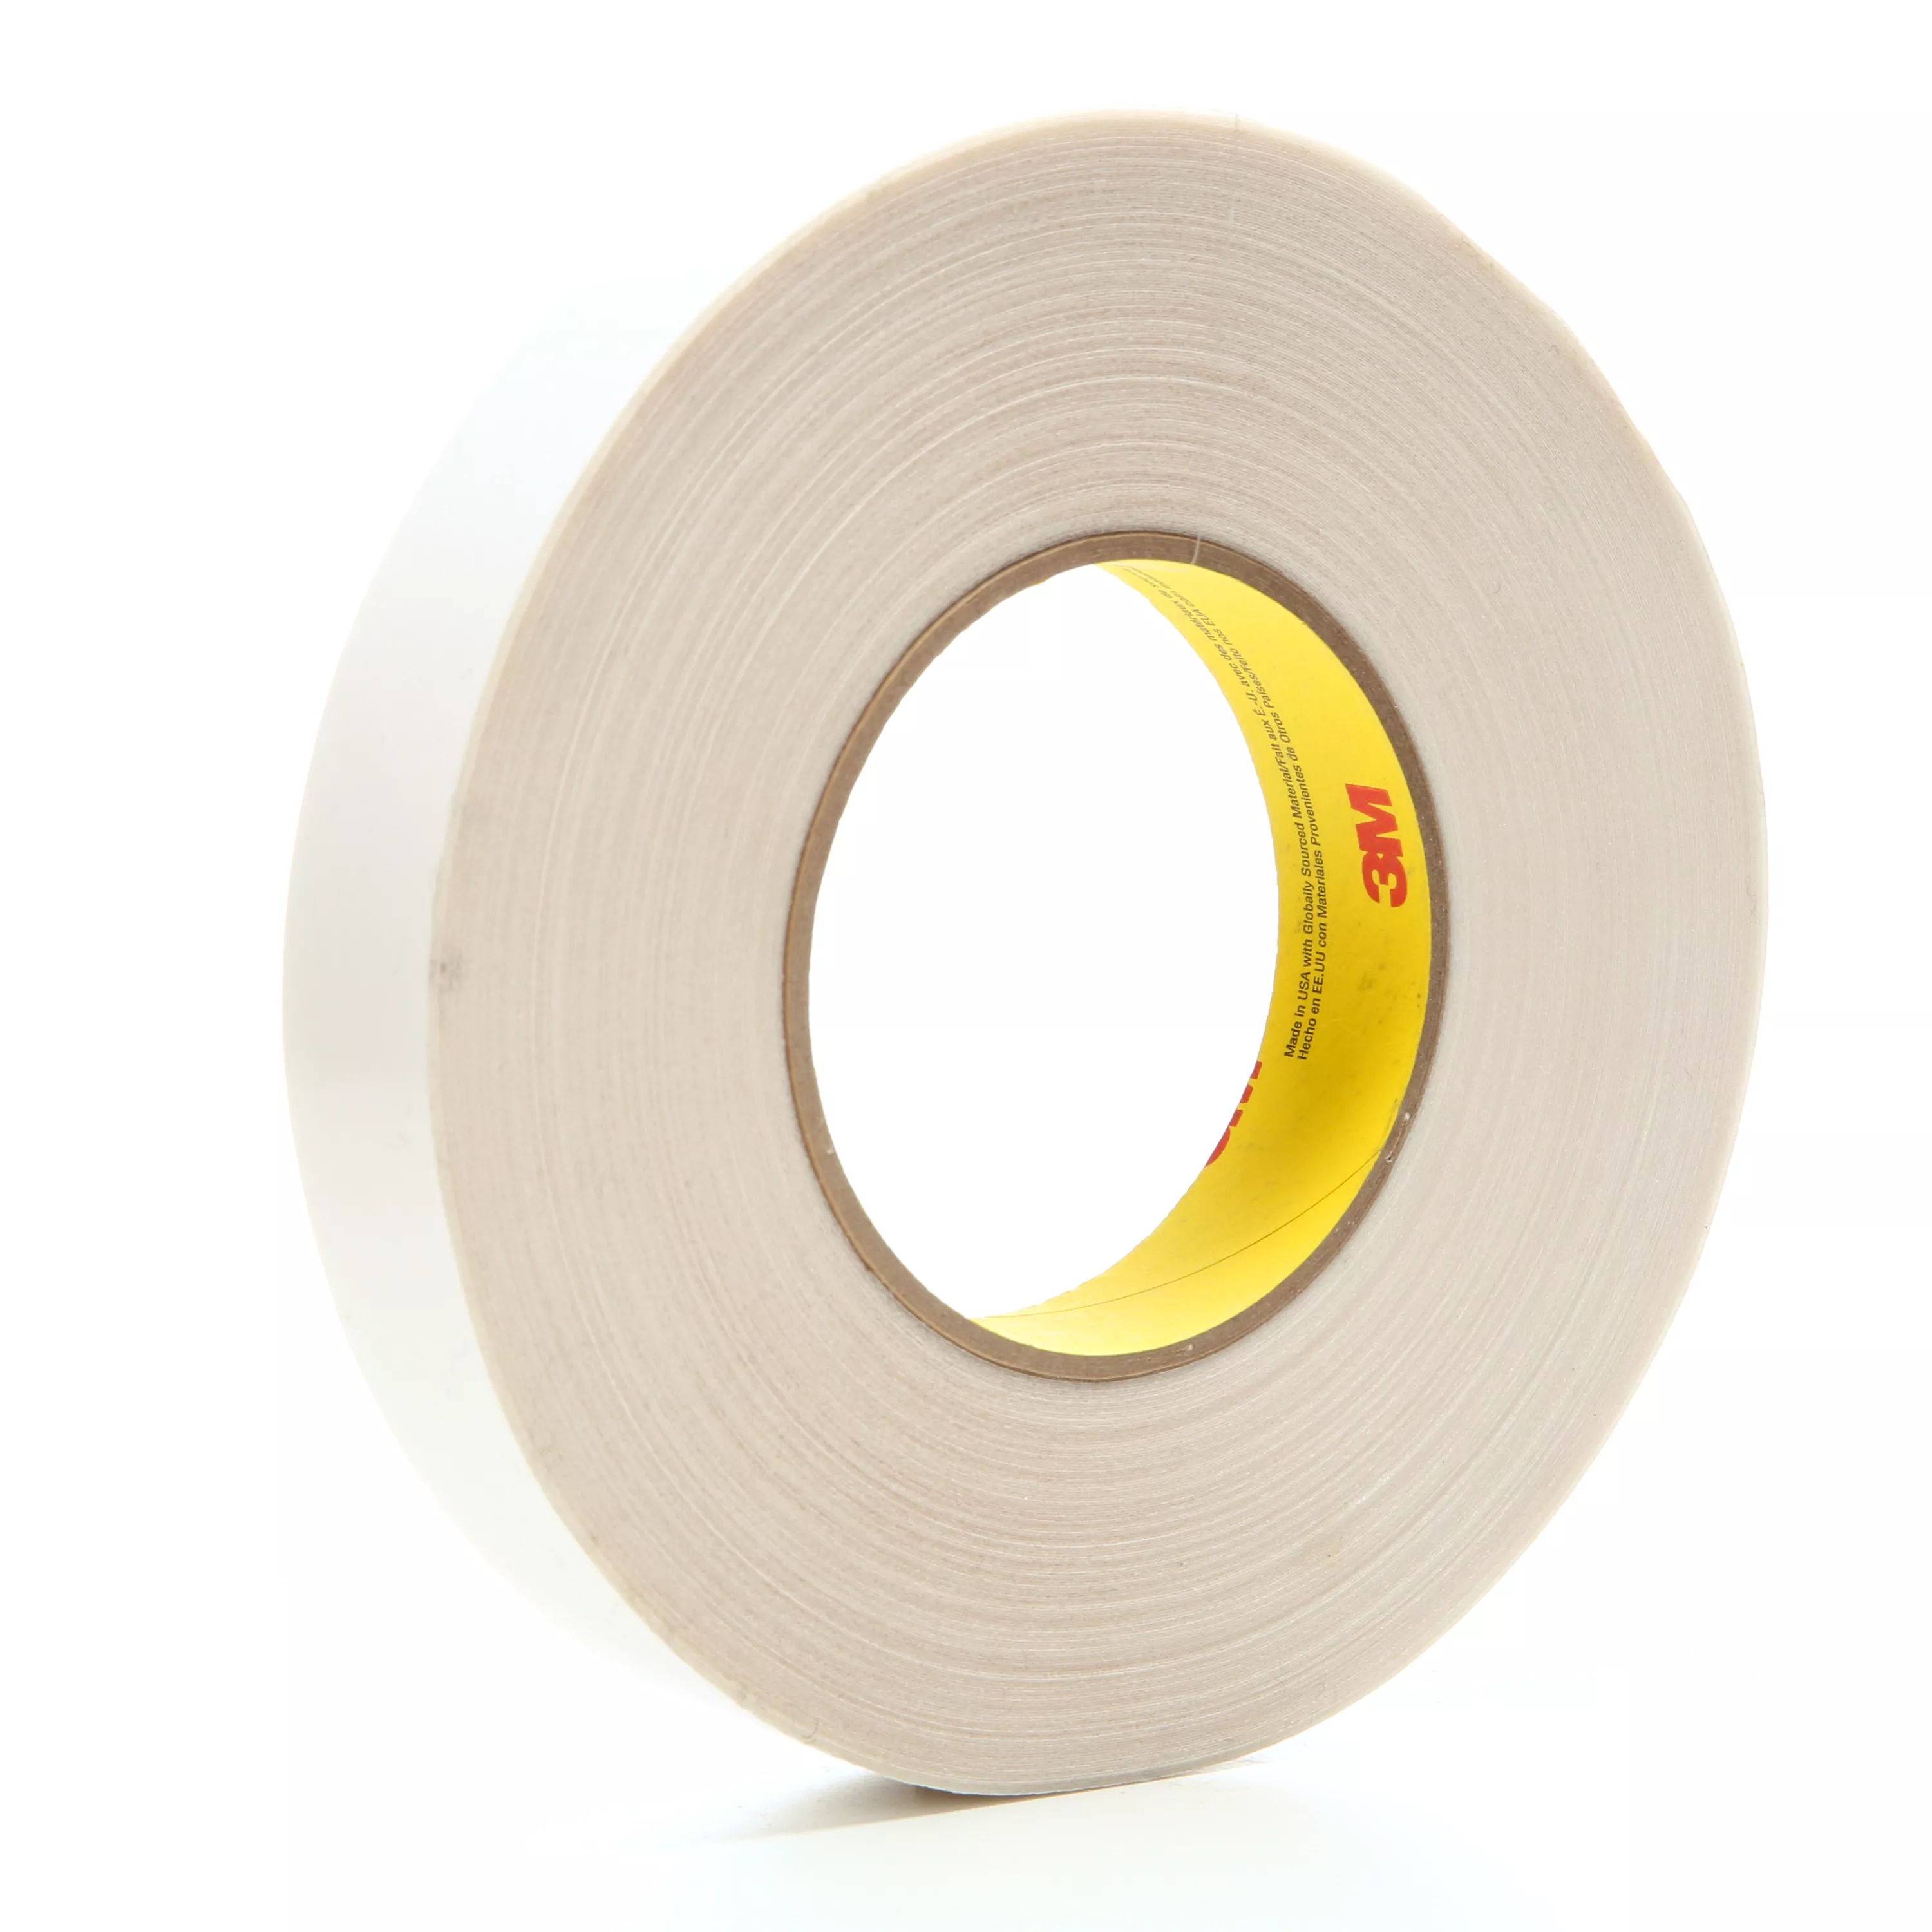 3M™ Double Coated Tape 9741, Clear, 24 mm x 55 m, 6.5 mil, 48 Roll/Case